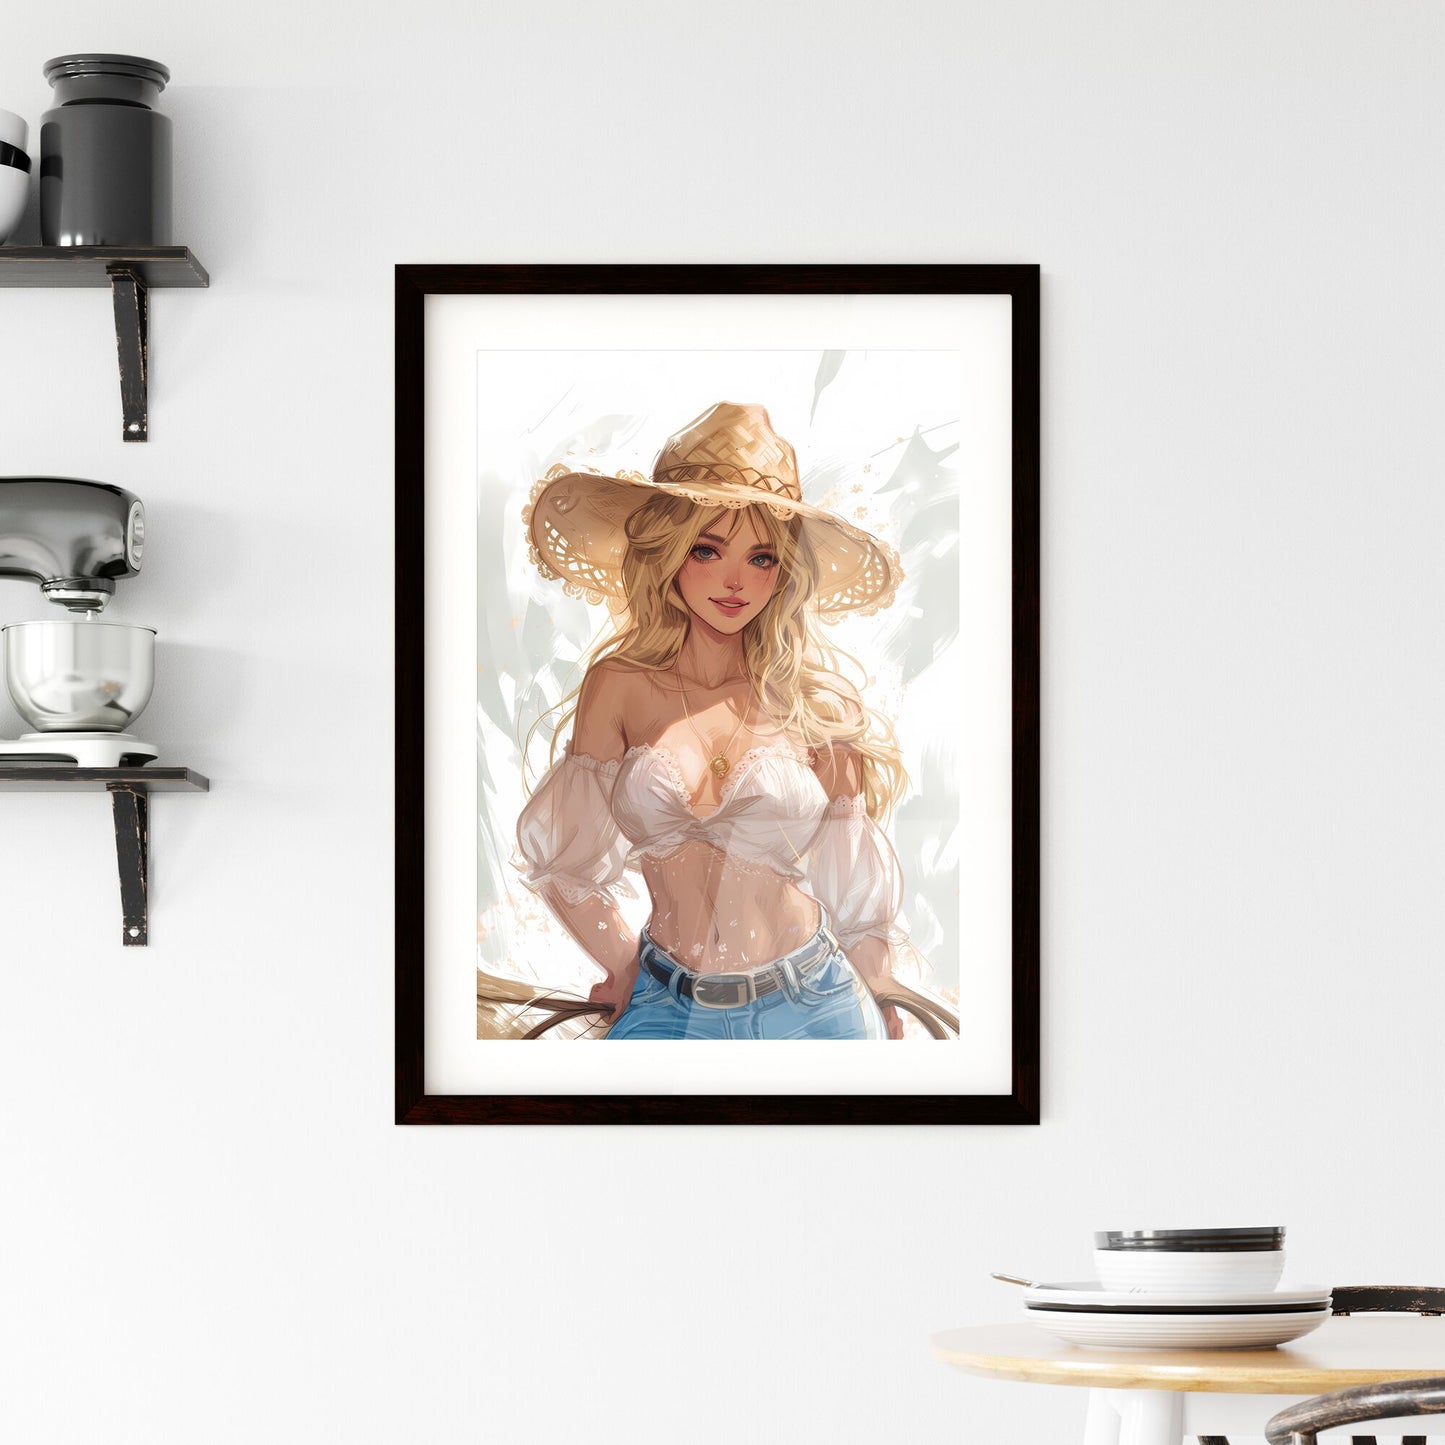 Cowgirl - Art print of a woman wearing a straw hat Default Title